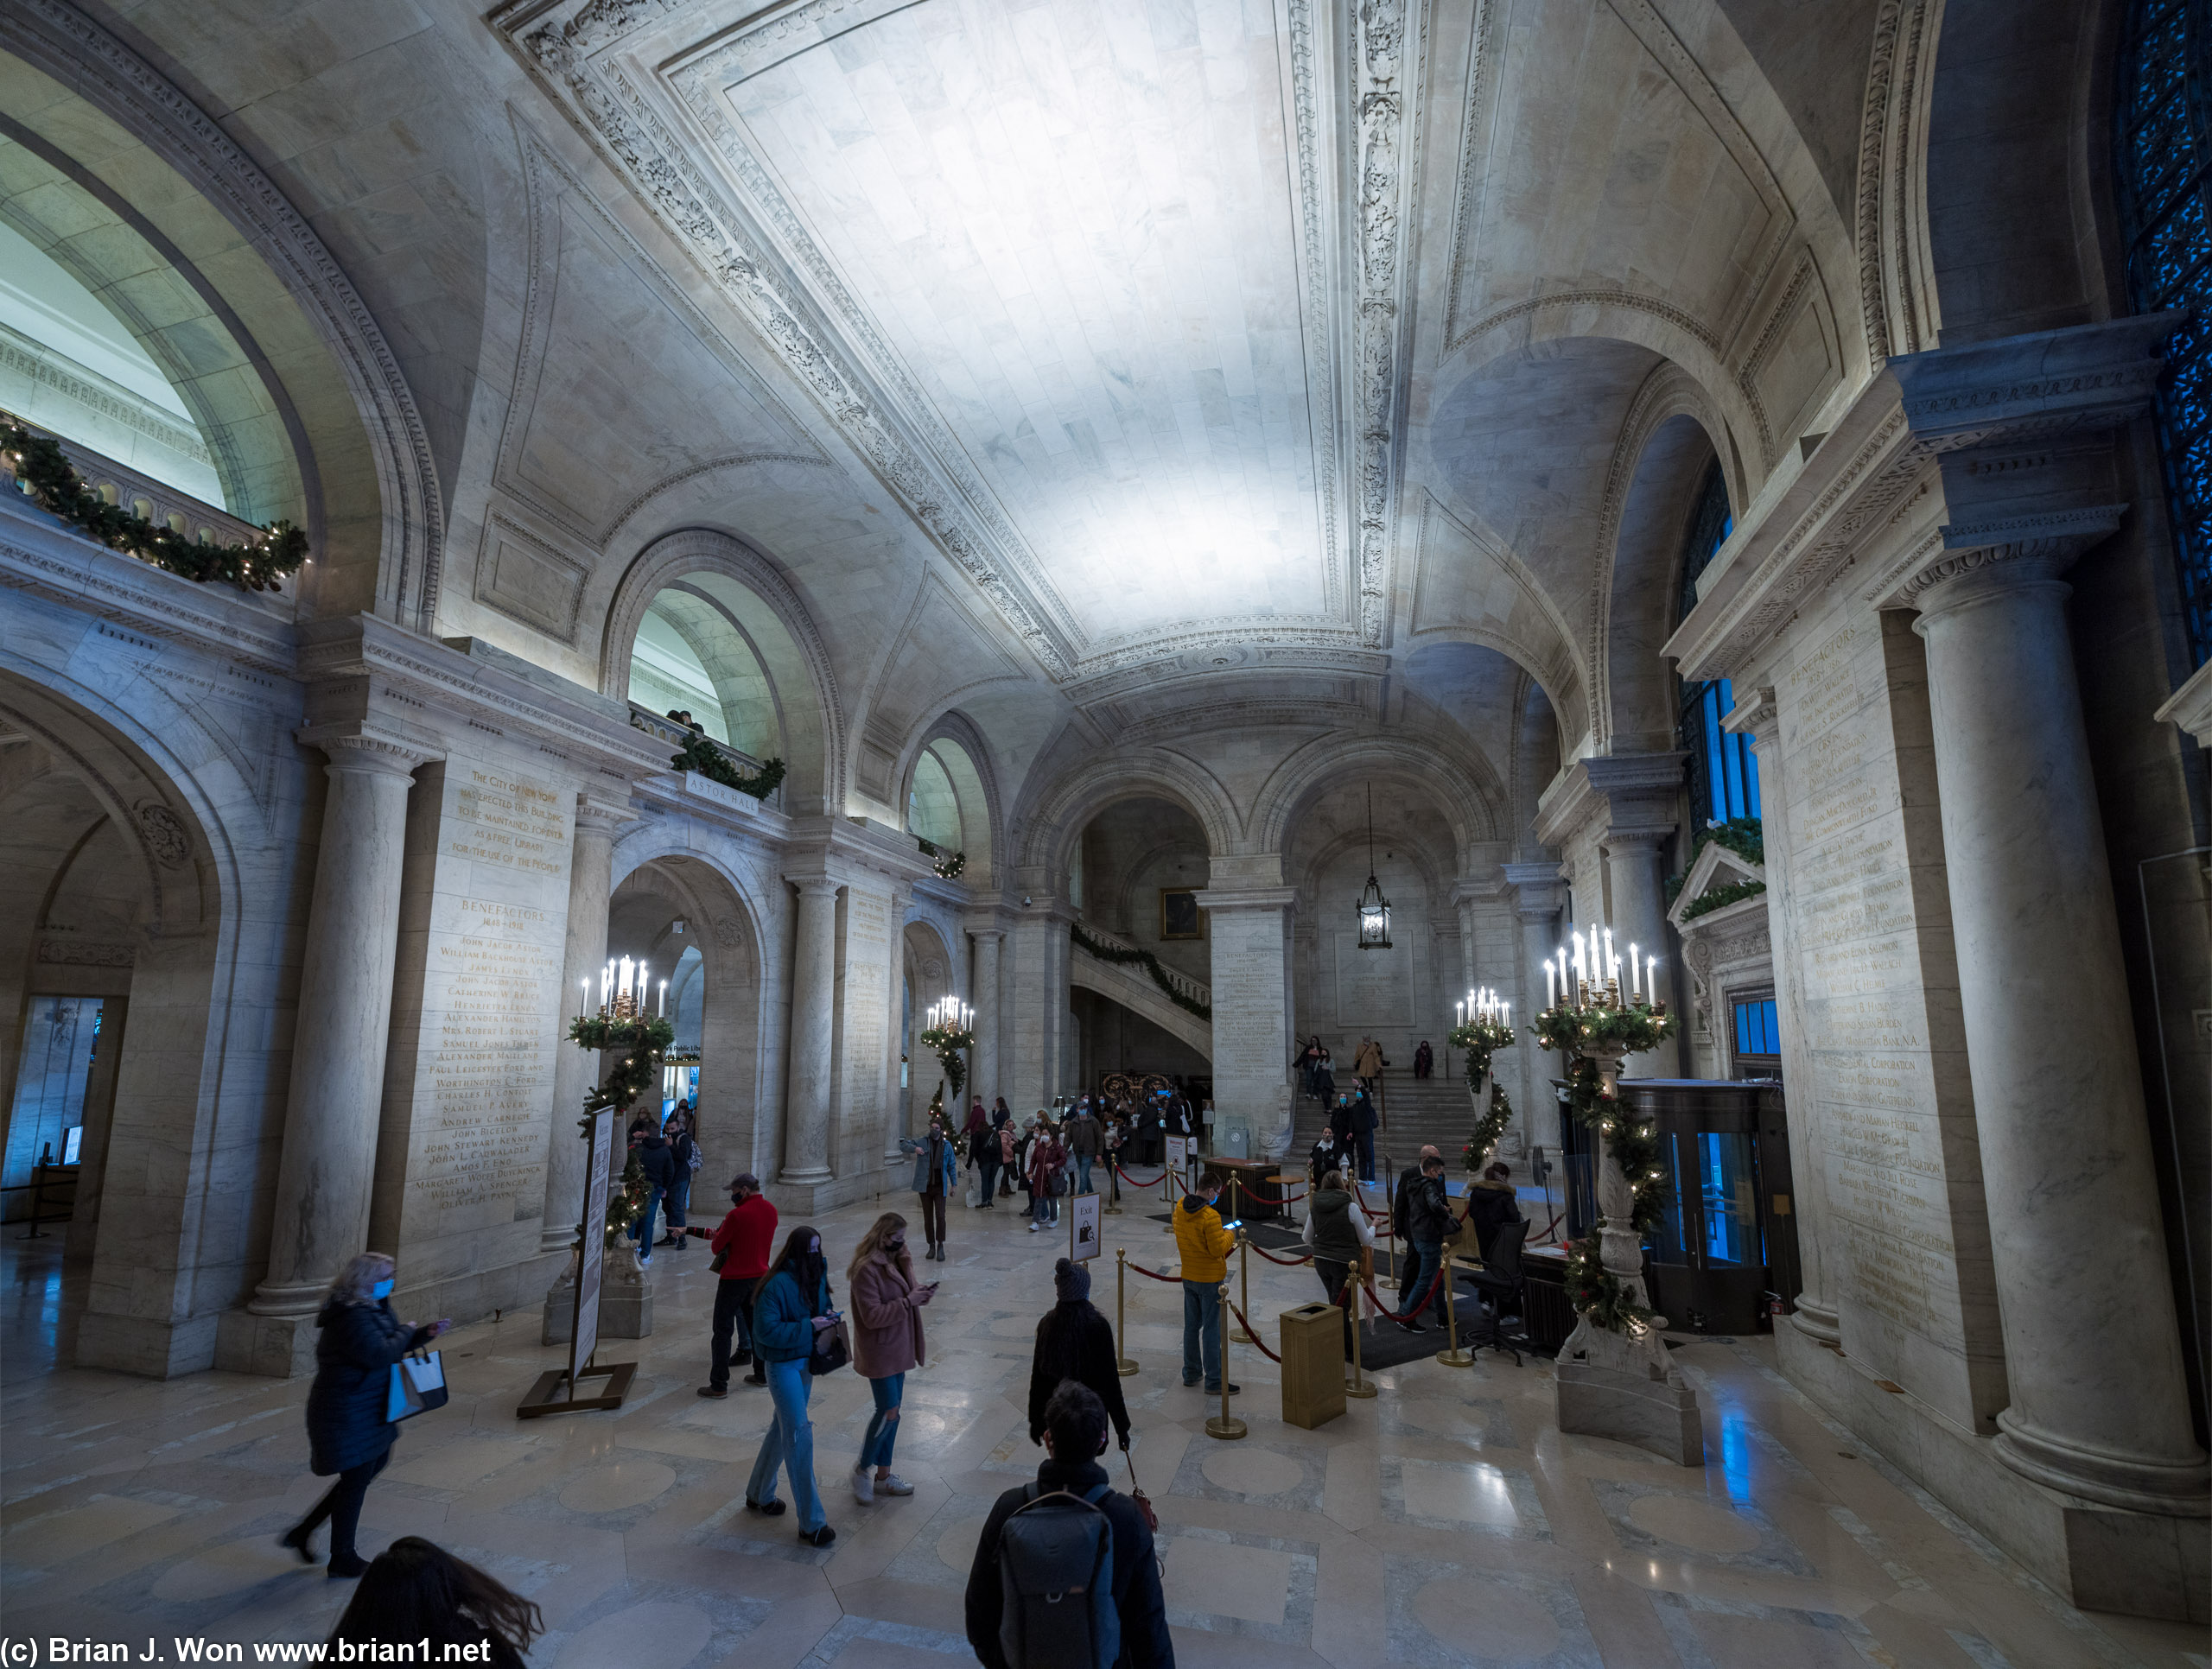 New York Public Library. Even the lobby is beautiful.